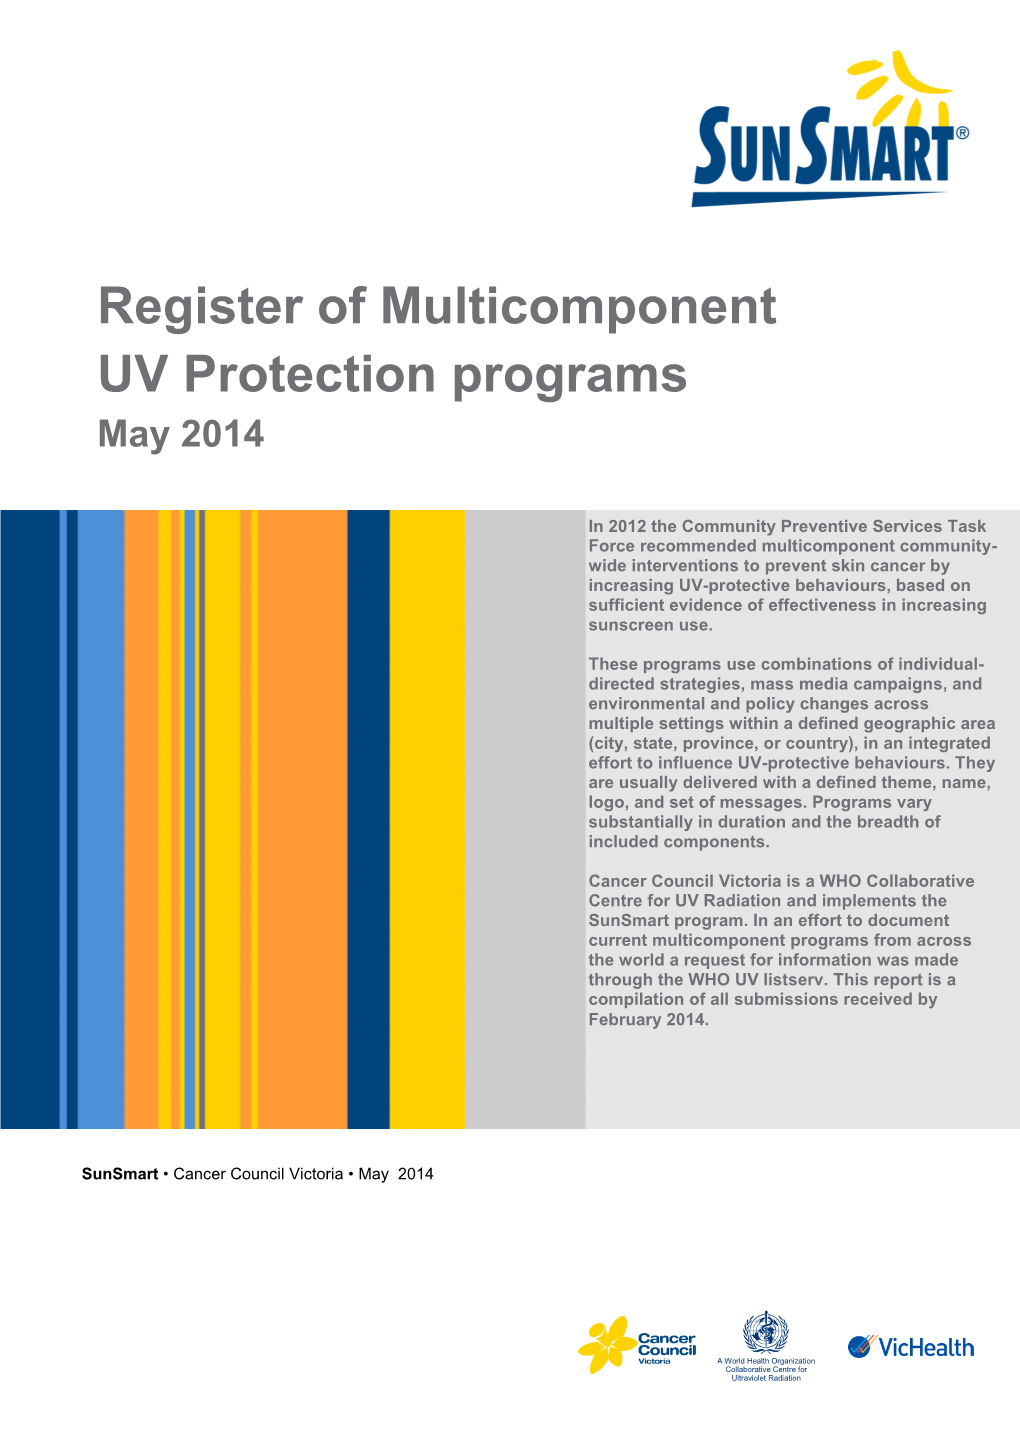 Register of Multicomponent UV Protection Programs May 2014